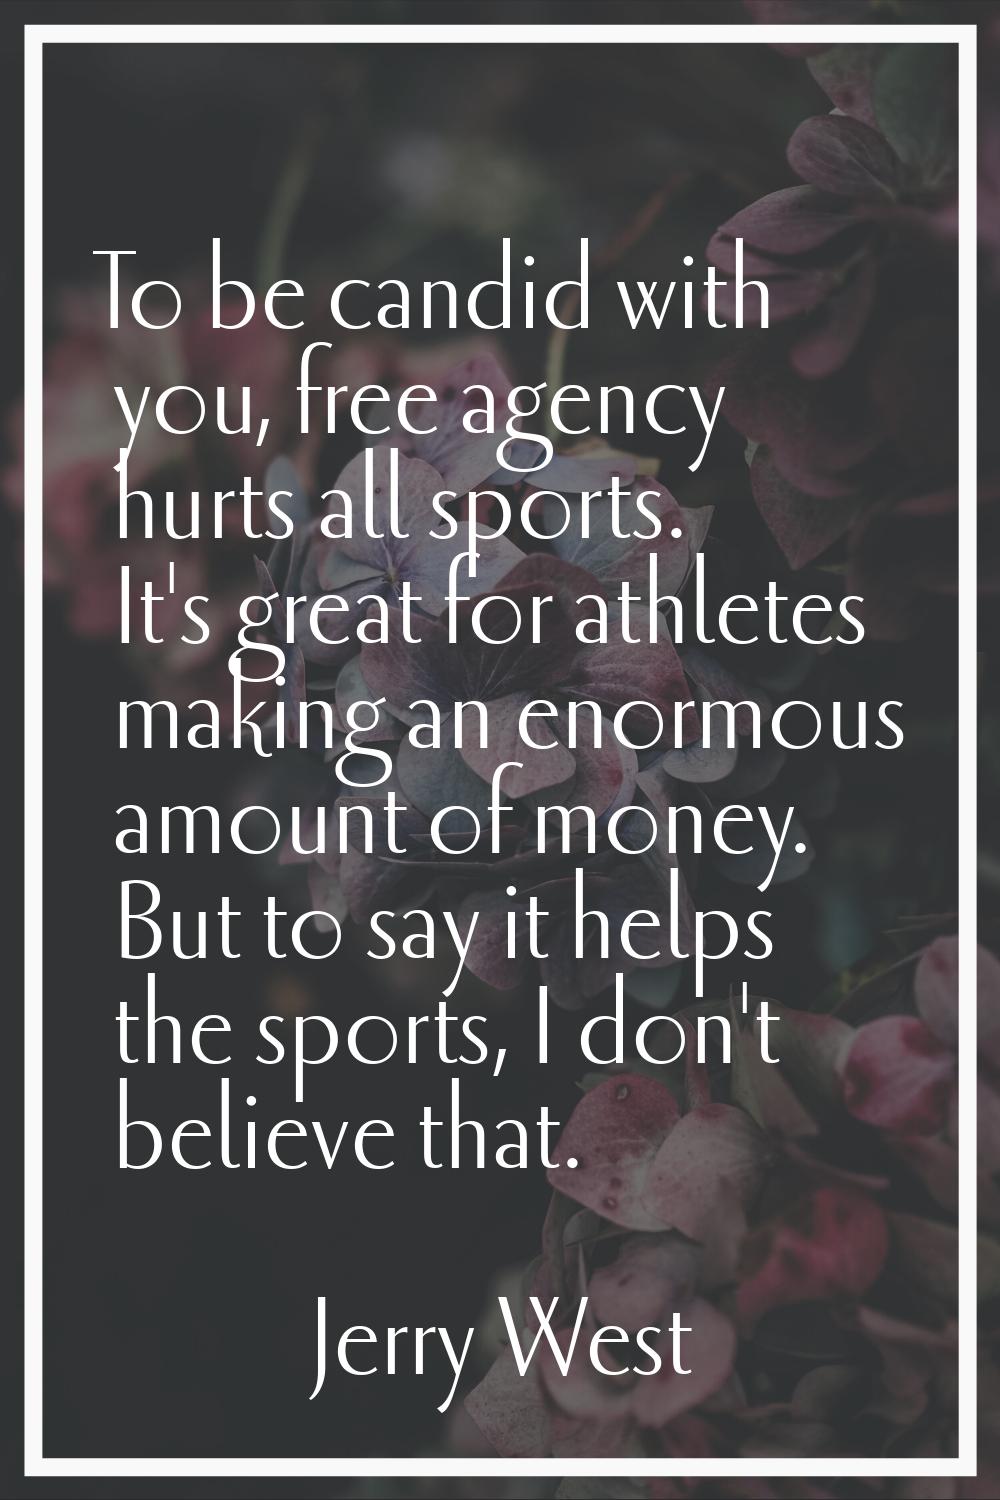 To be candid with you, free agency hurts all sports. It's great for athletes making an enormous amo